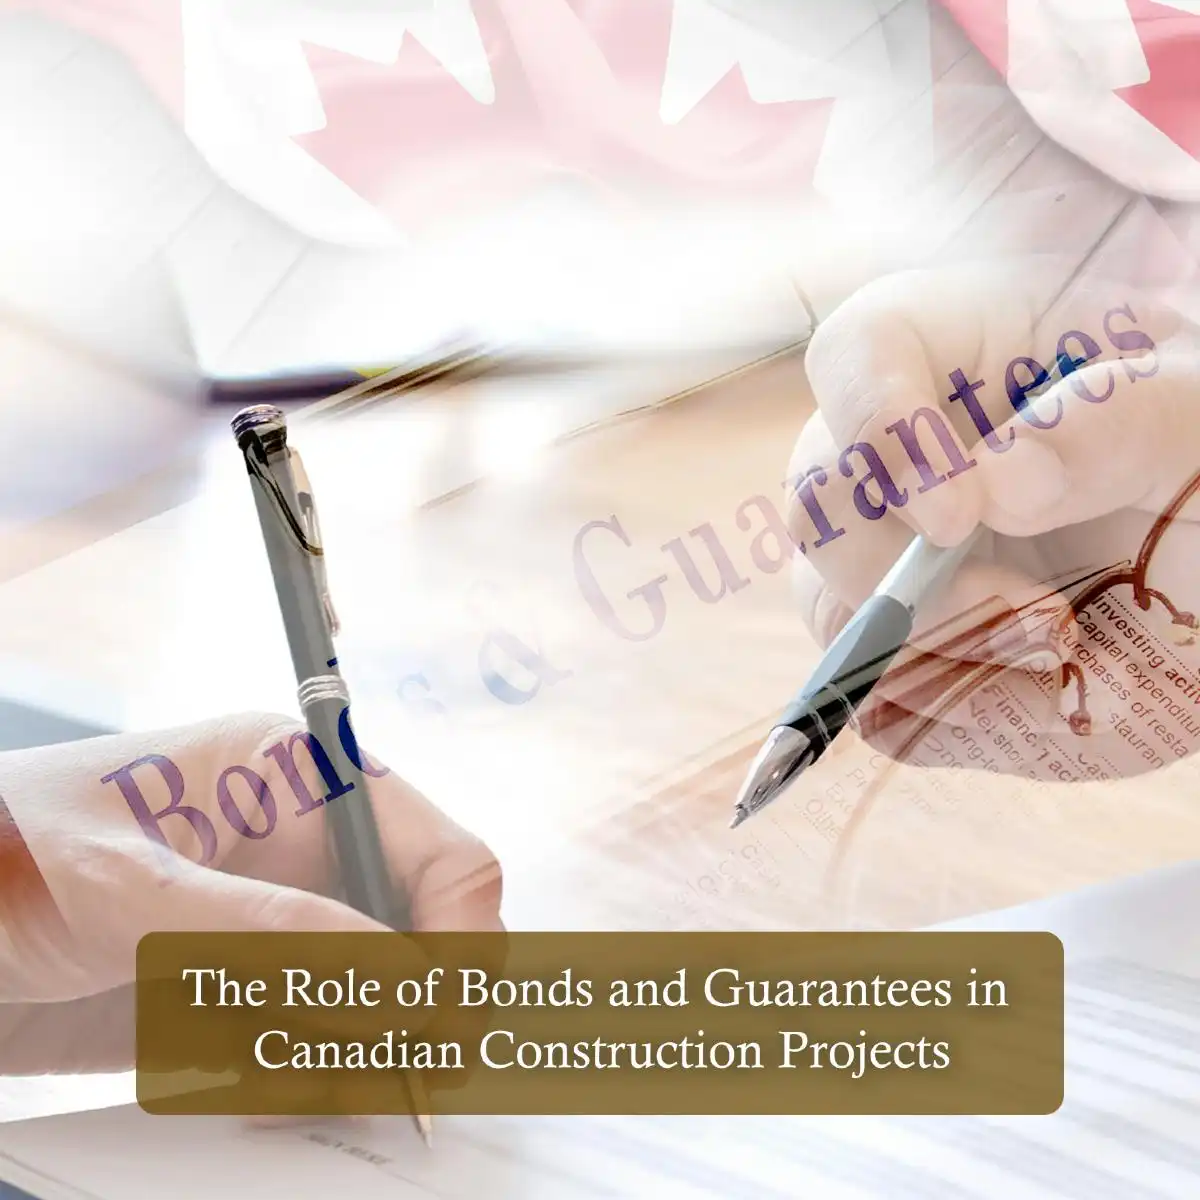 The Role of Bonds and Guarantees in Canadian Construction Projects